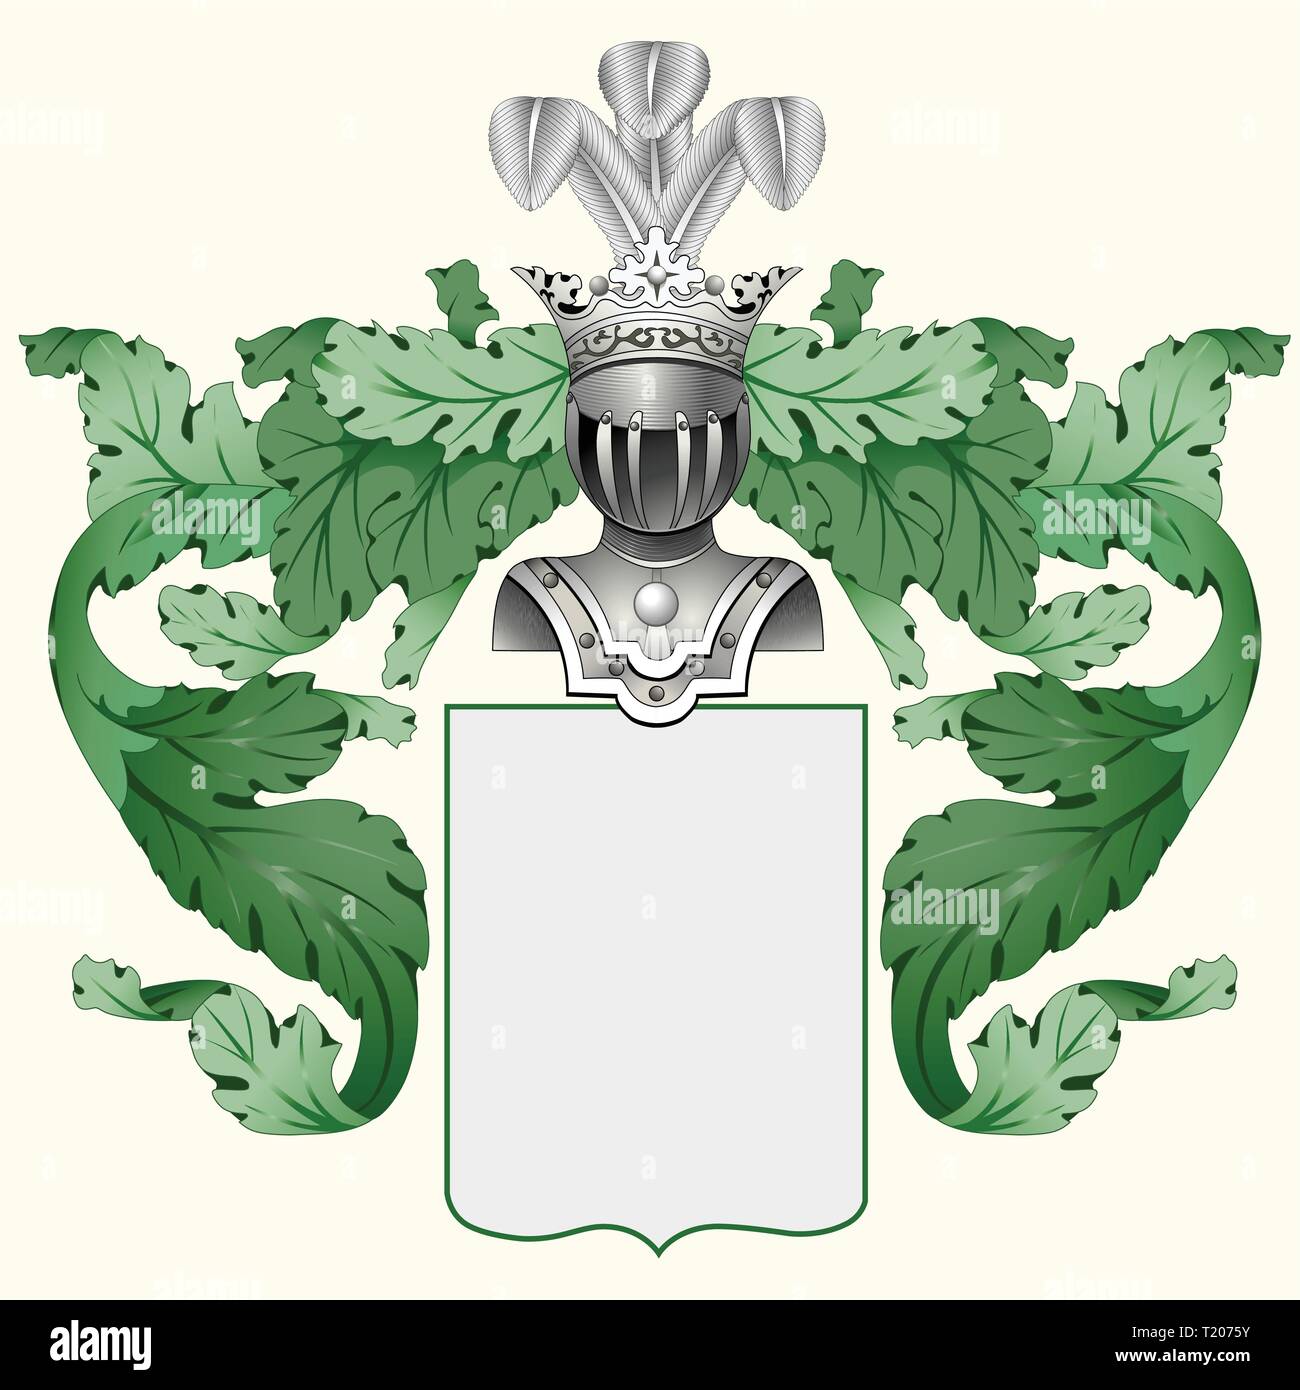 Illustration of a heraldic crest or family coat of arms Stock Vector